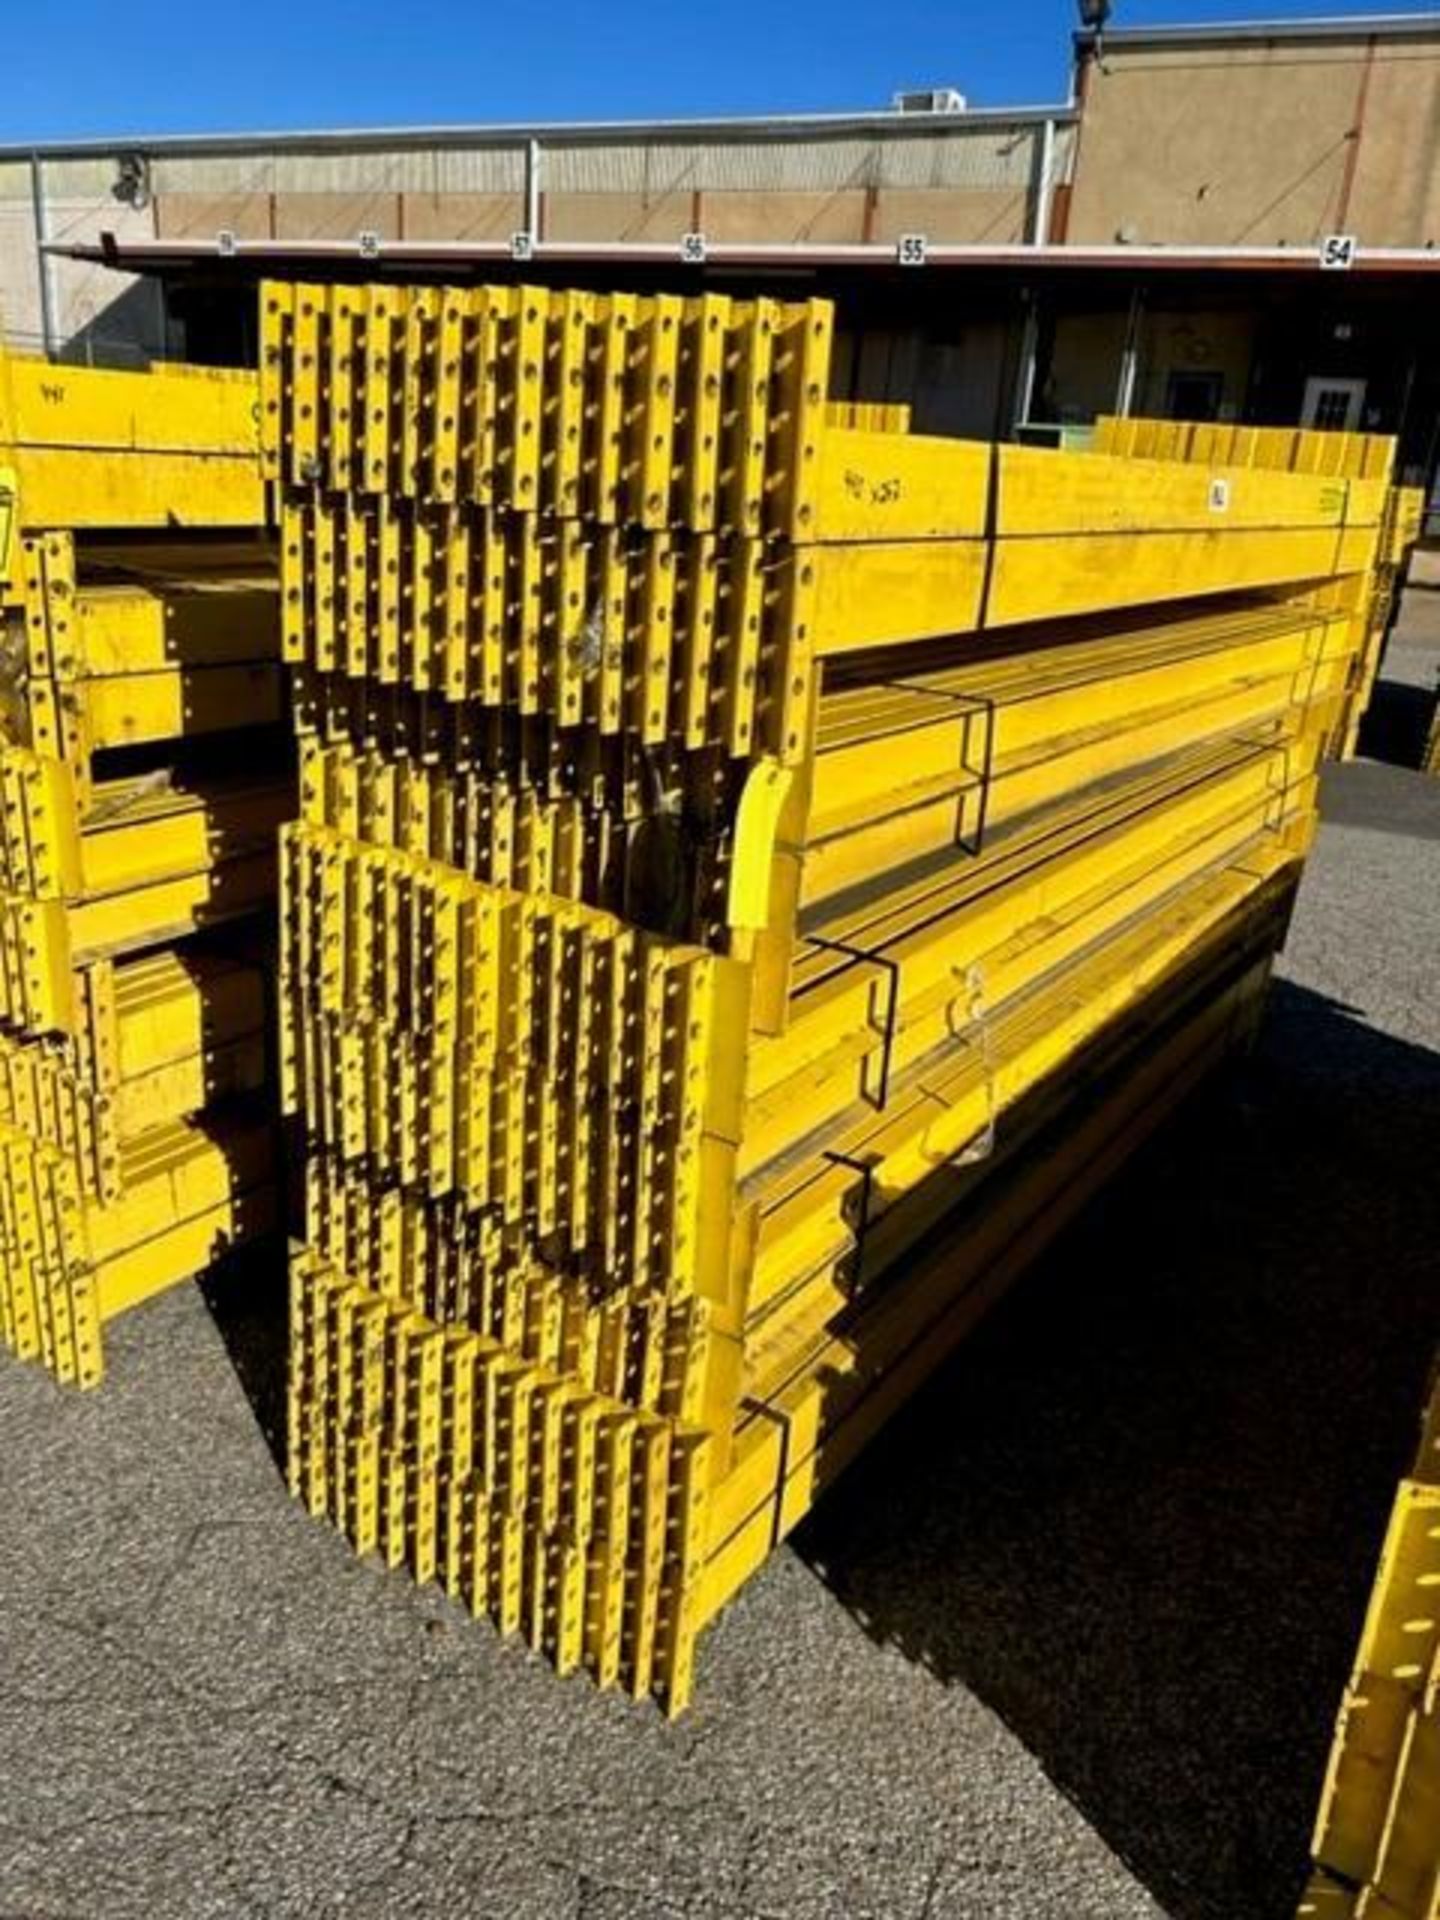 (56x) Bolt Together C-Channel Beams, 108"x4" ($25 Loading Fee Will Be Added to Buyers Invoice) - Image 4 of 10